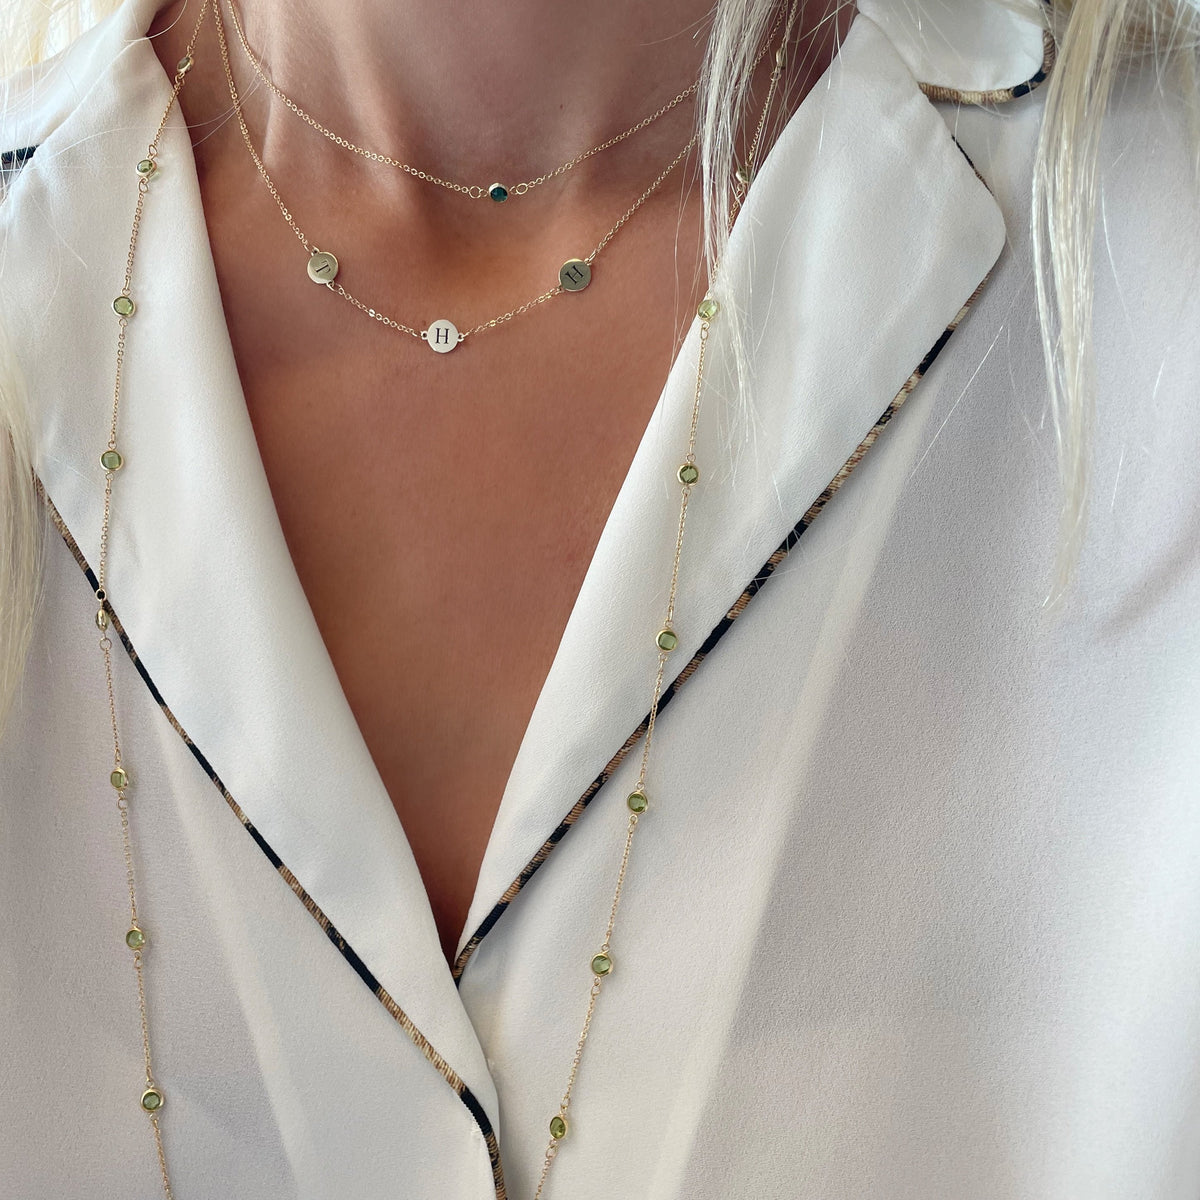 How To Layer Necklaces Like An Expert | Natural Diamonds